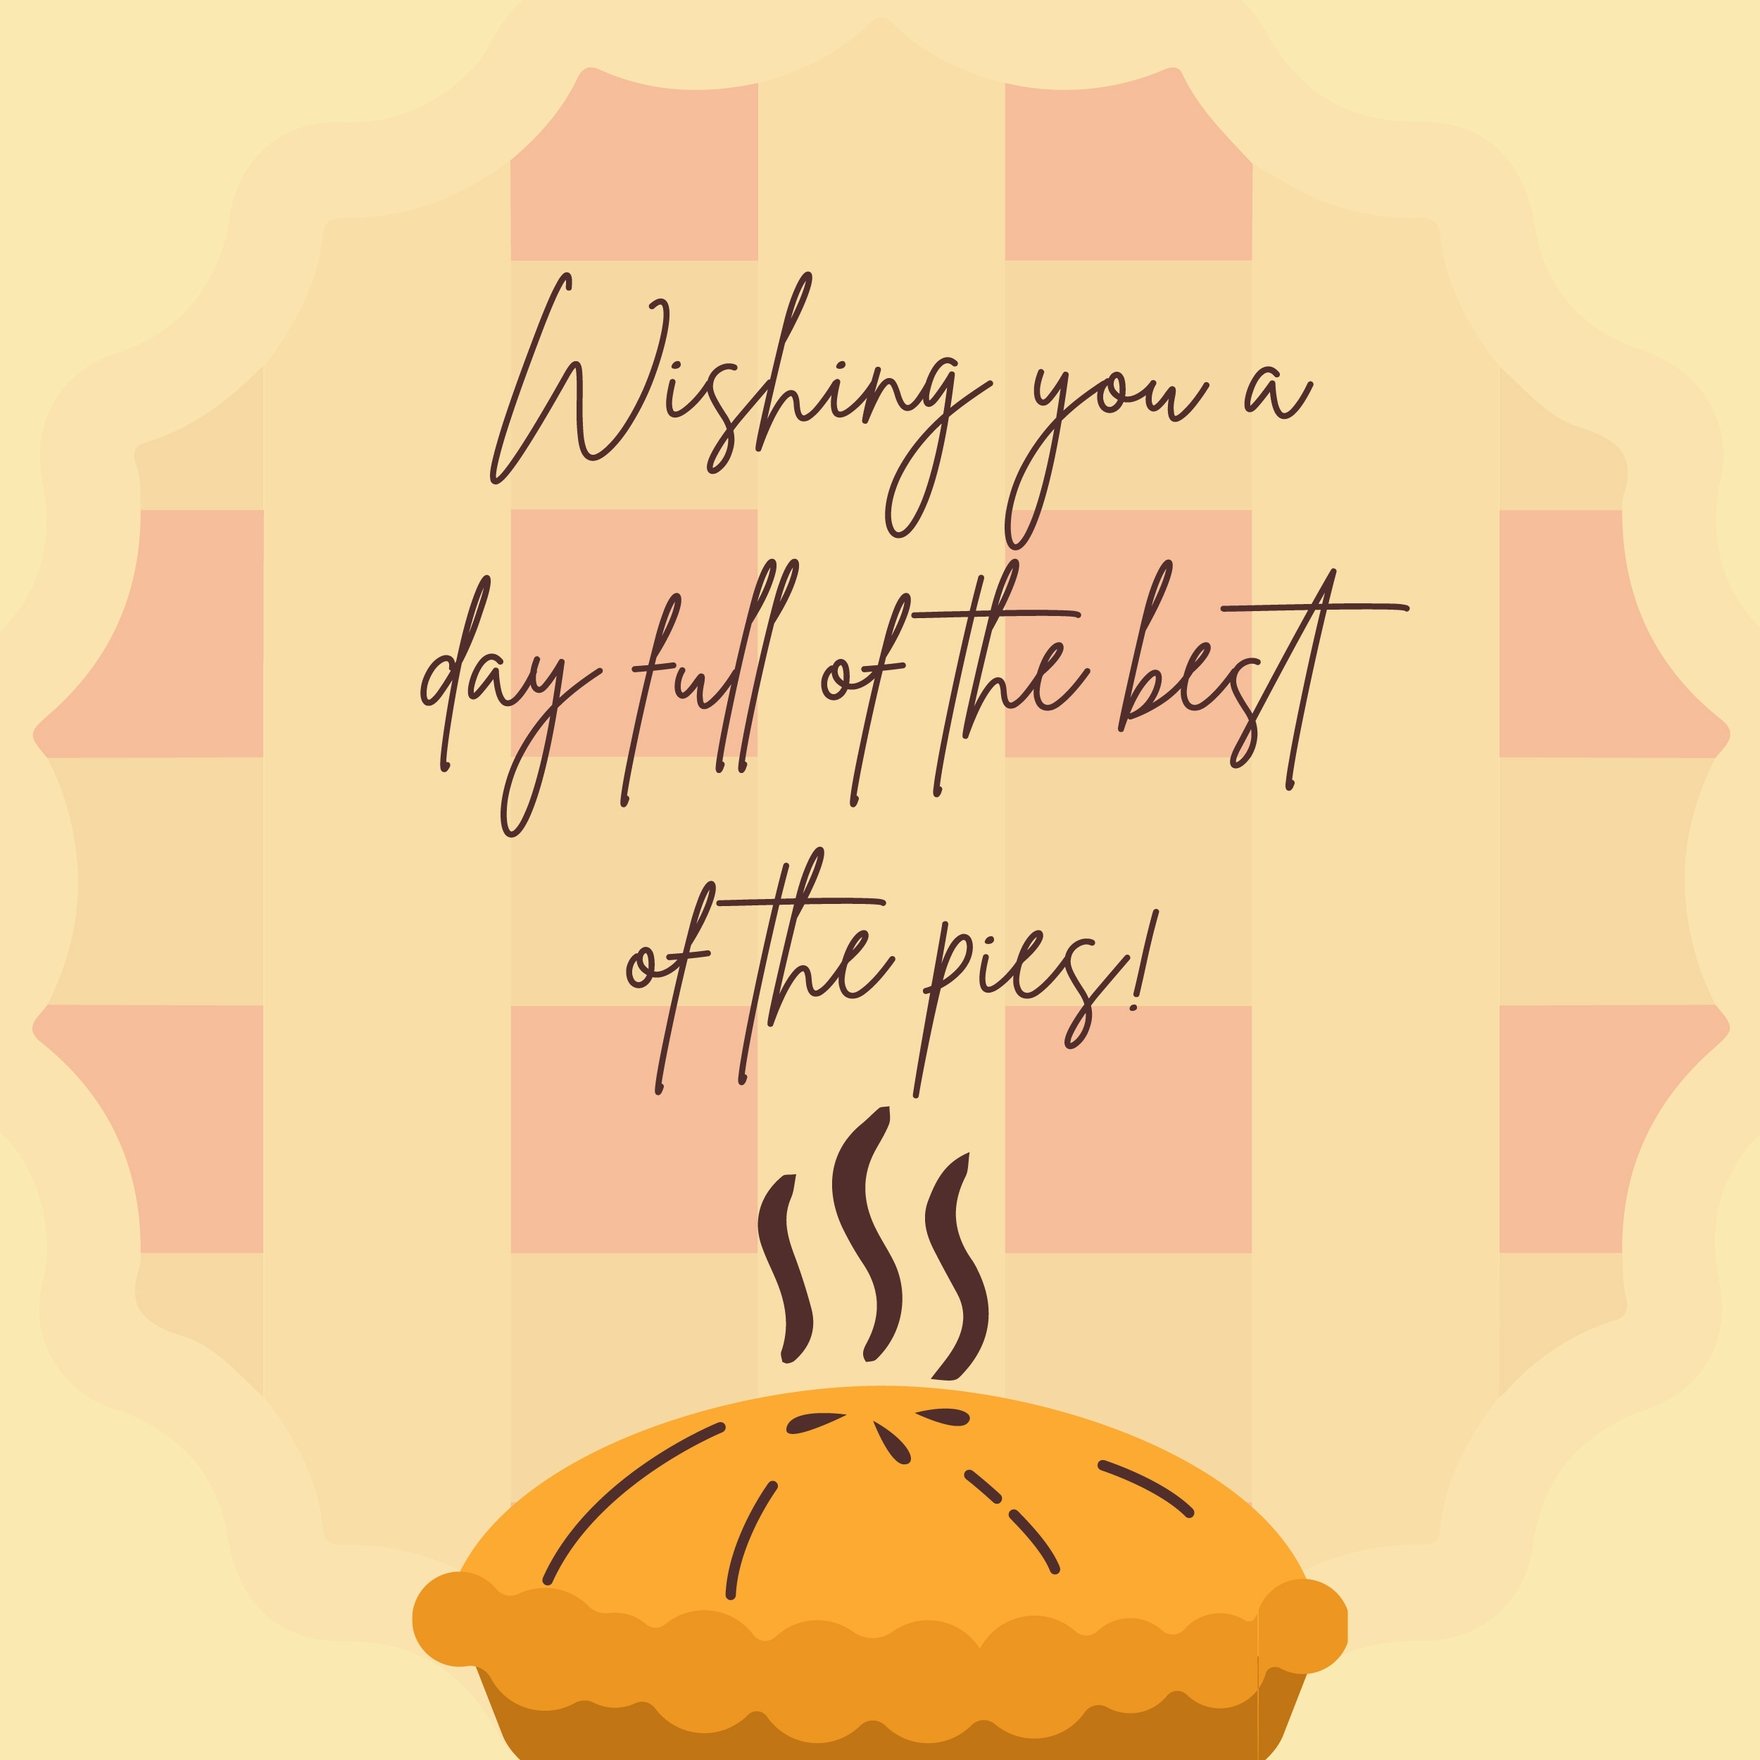 National Pie Day Whatsapp Post in Illustrator, PSD, EPS, SVG, JPG, PNG